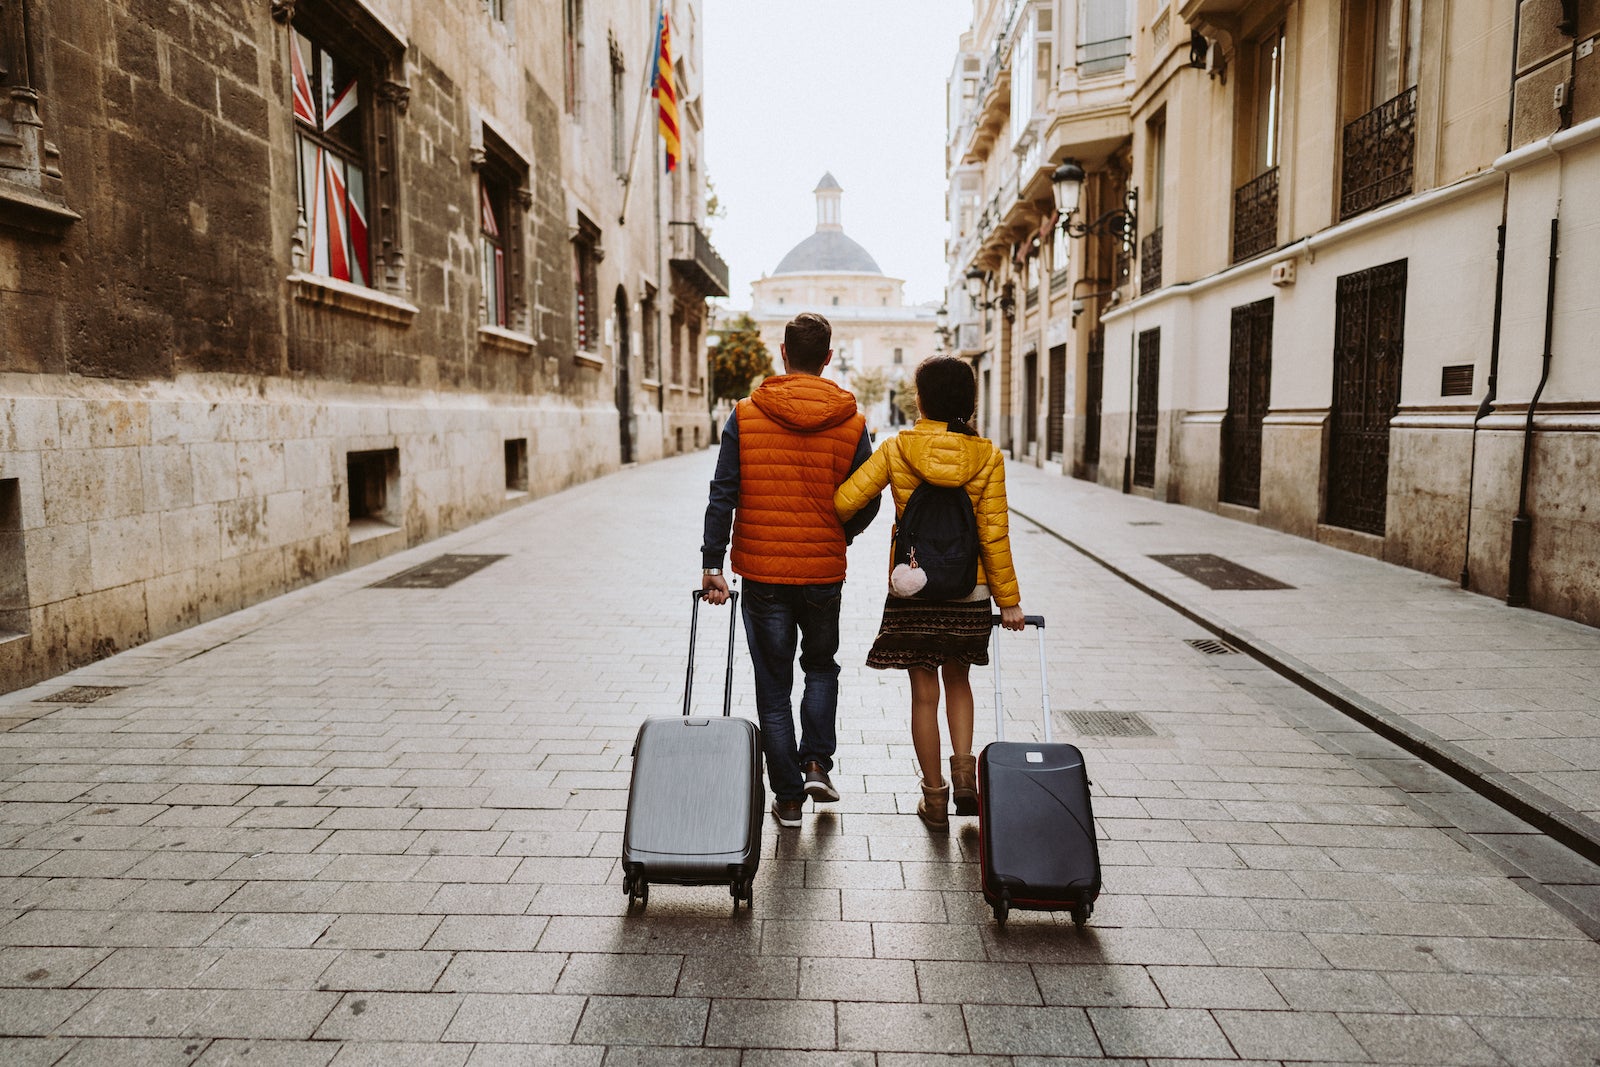 A view from behind of a couple walking on cobble streets with two carry-on sized luggage with wheels.